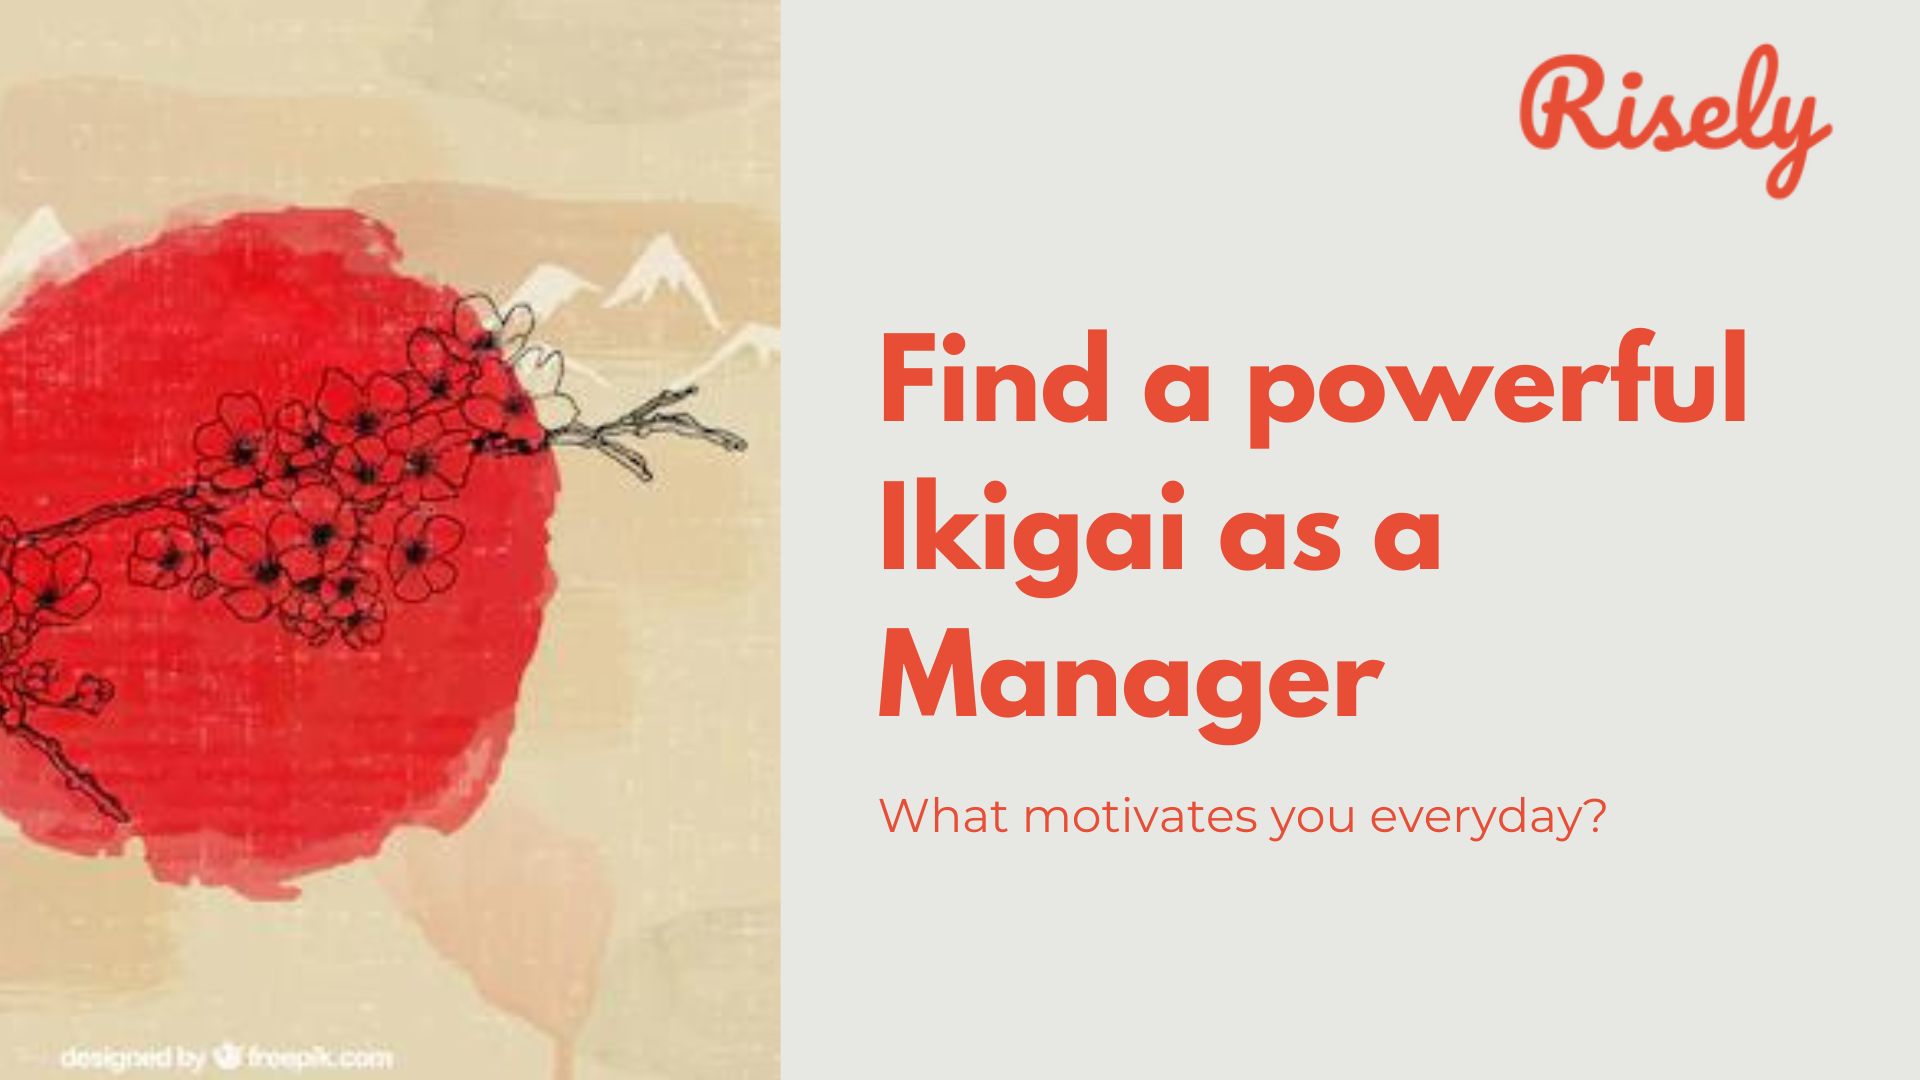 ikigai. This image represents the blog on ikigai for managers